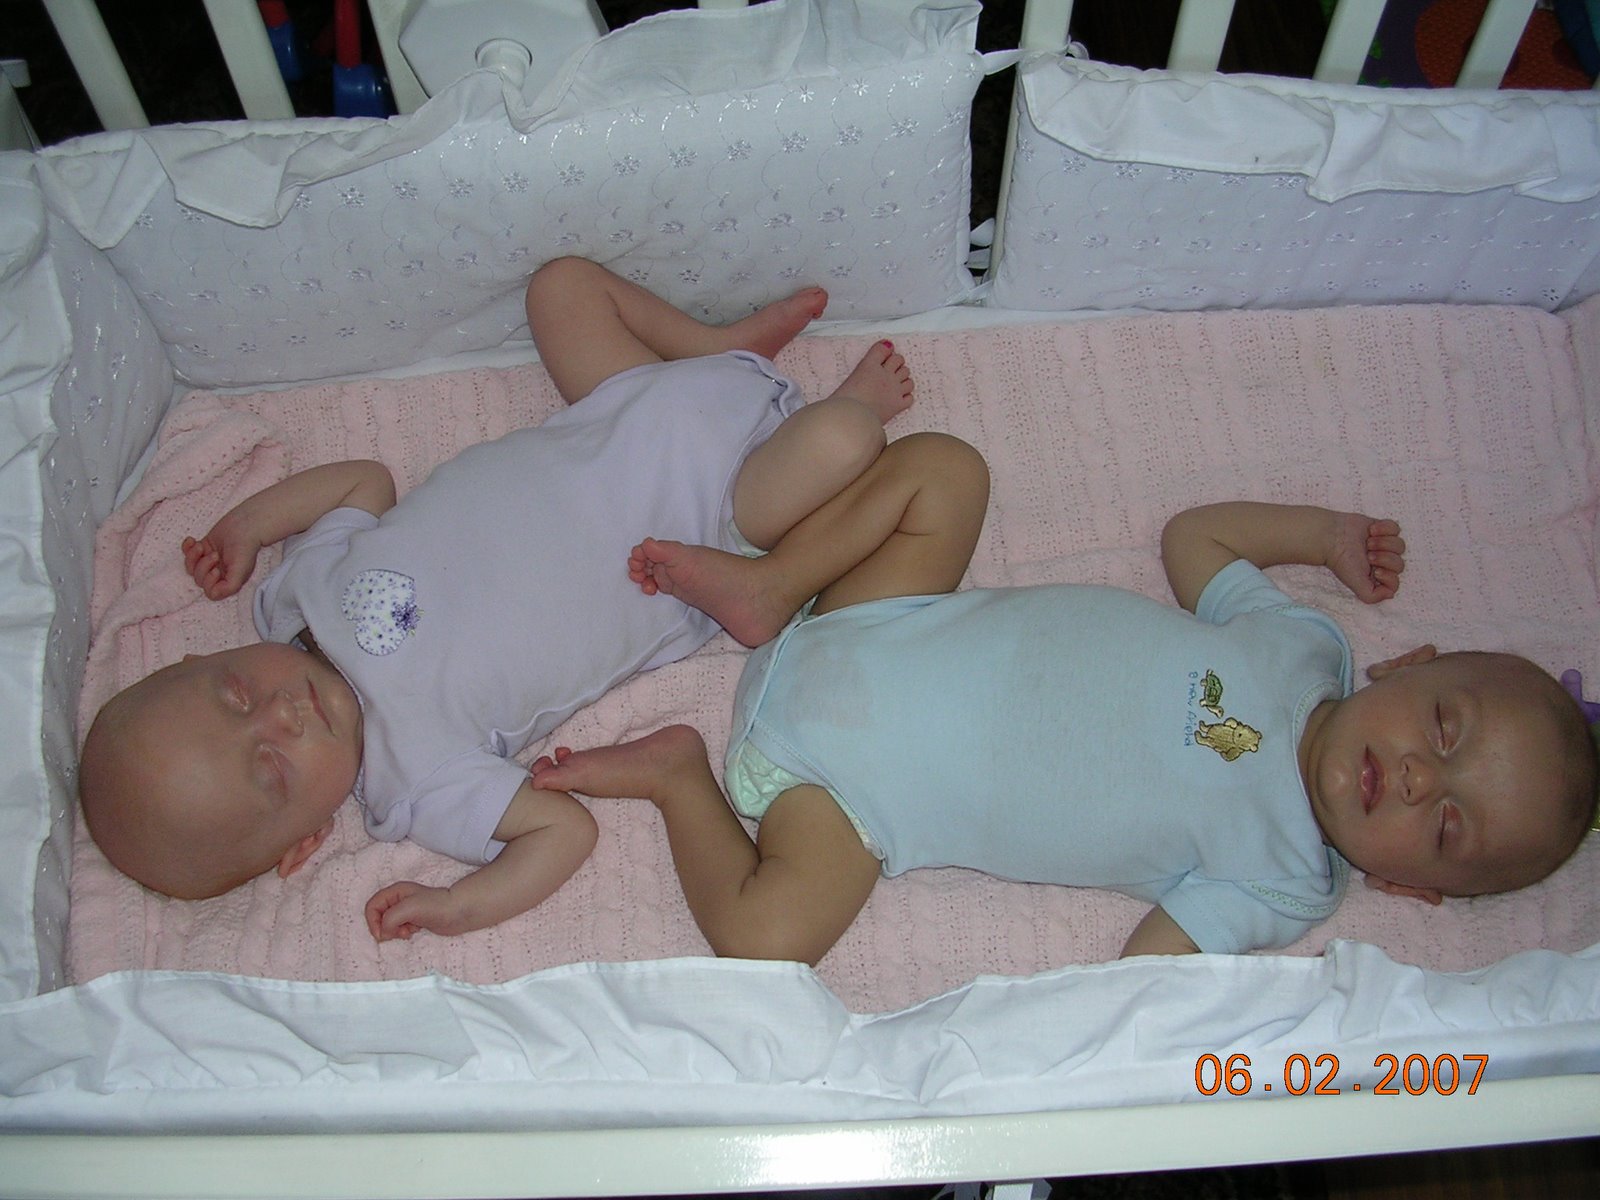 [Kate+and+Ty+in+their+cradle+1.jpg]